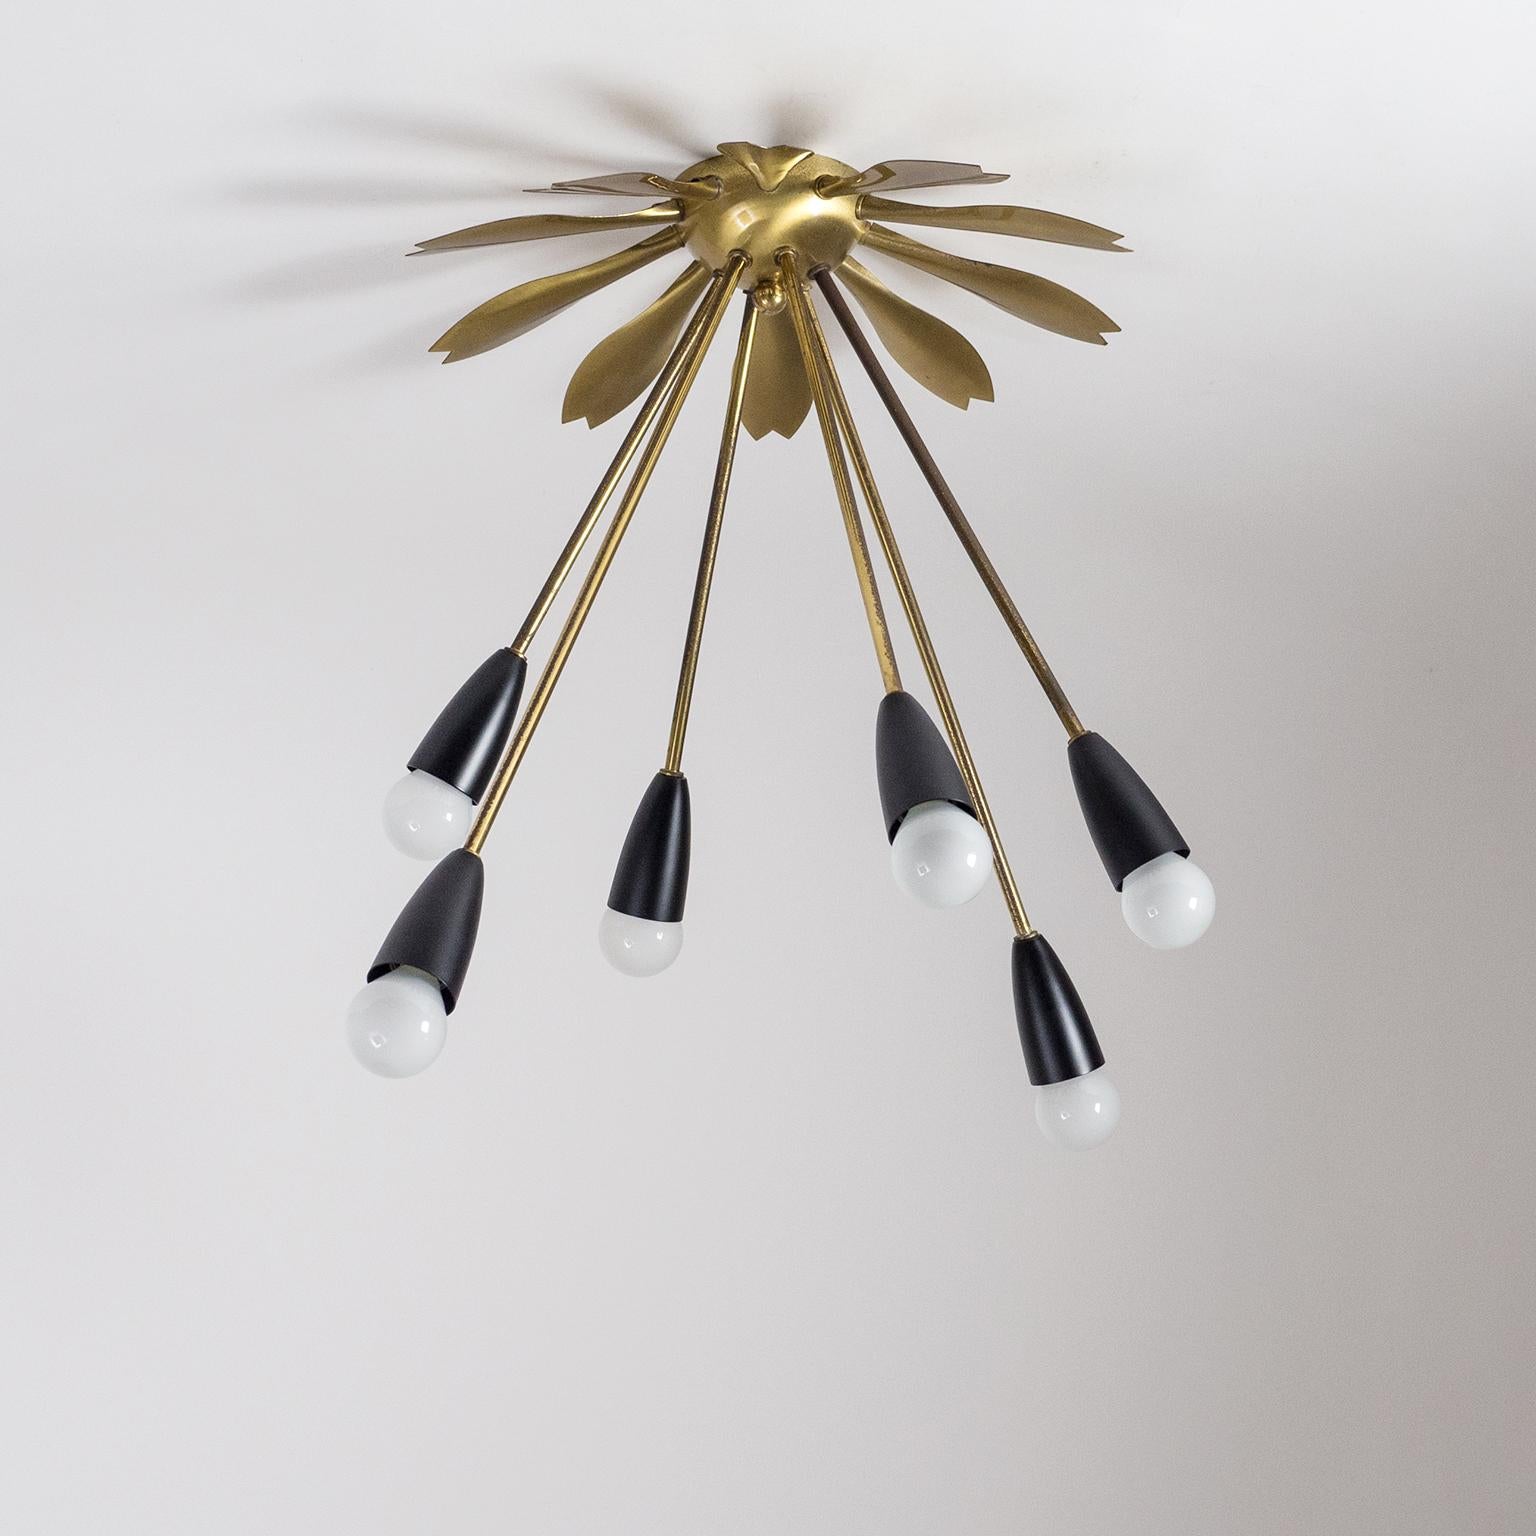 Very unique six-arm Sputnik flush mount from 1950s. The centerpiece which attaches to the ceiling is shaped in a sunburst motif with six brass arms in varying lengths emanating from its center like sun rays. This rare piece is made entirely of brass